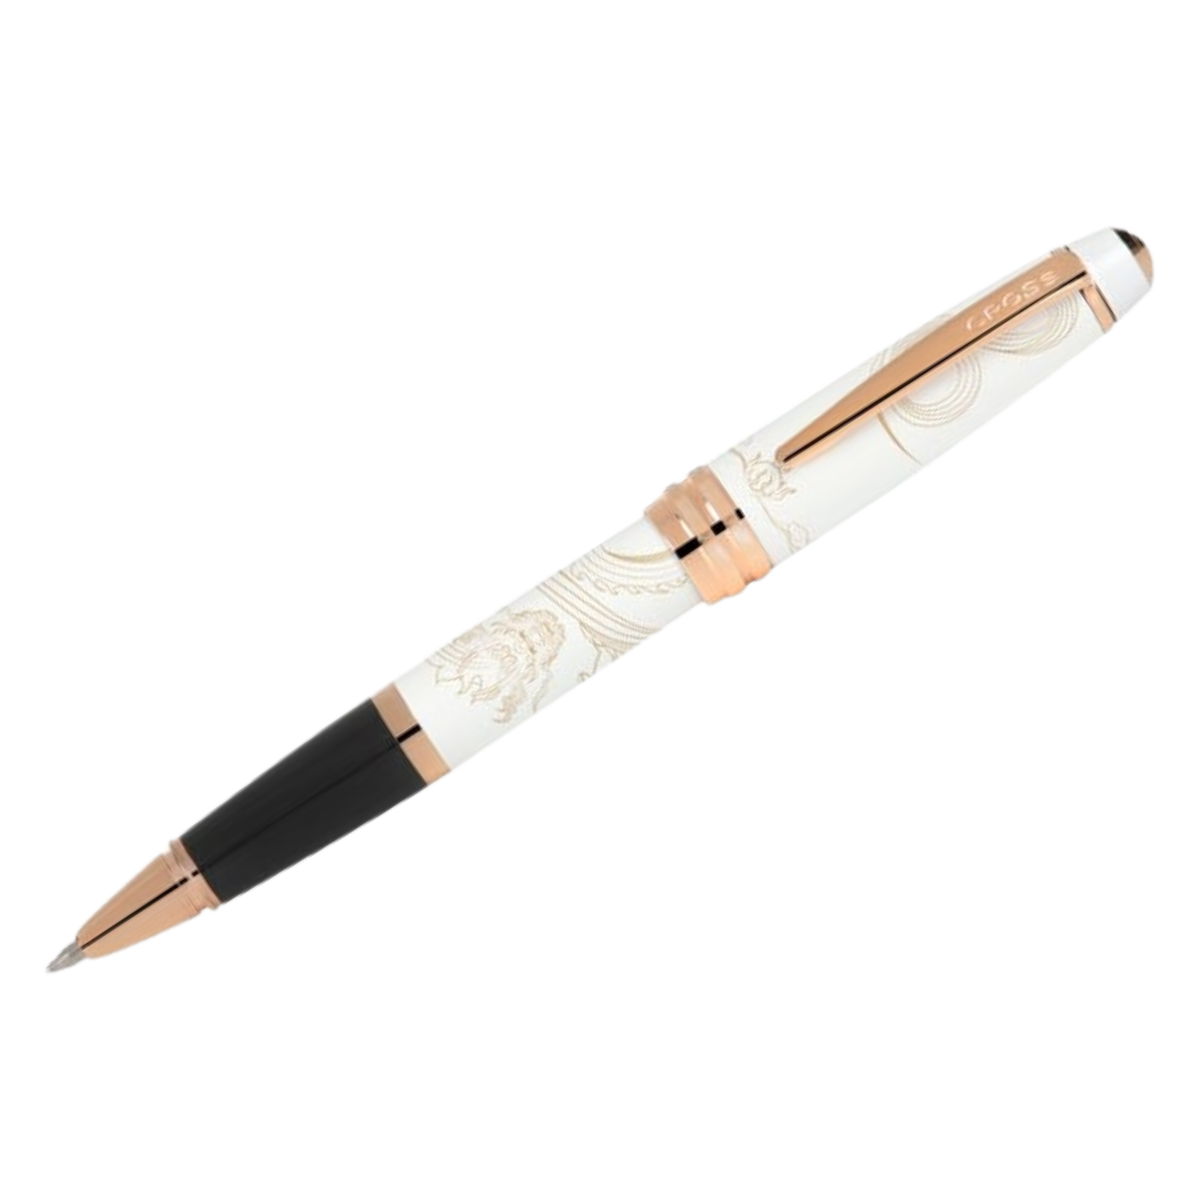 Cross Bailey - Year of the Dragon Pearlescent White Lacquer - Selectip Rollerball Pen - Rose Gold-Pen Boutique Ltd